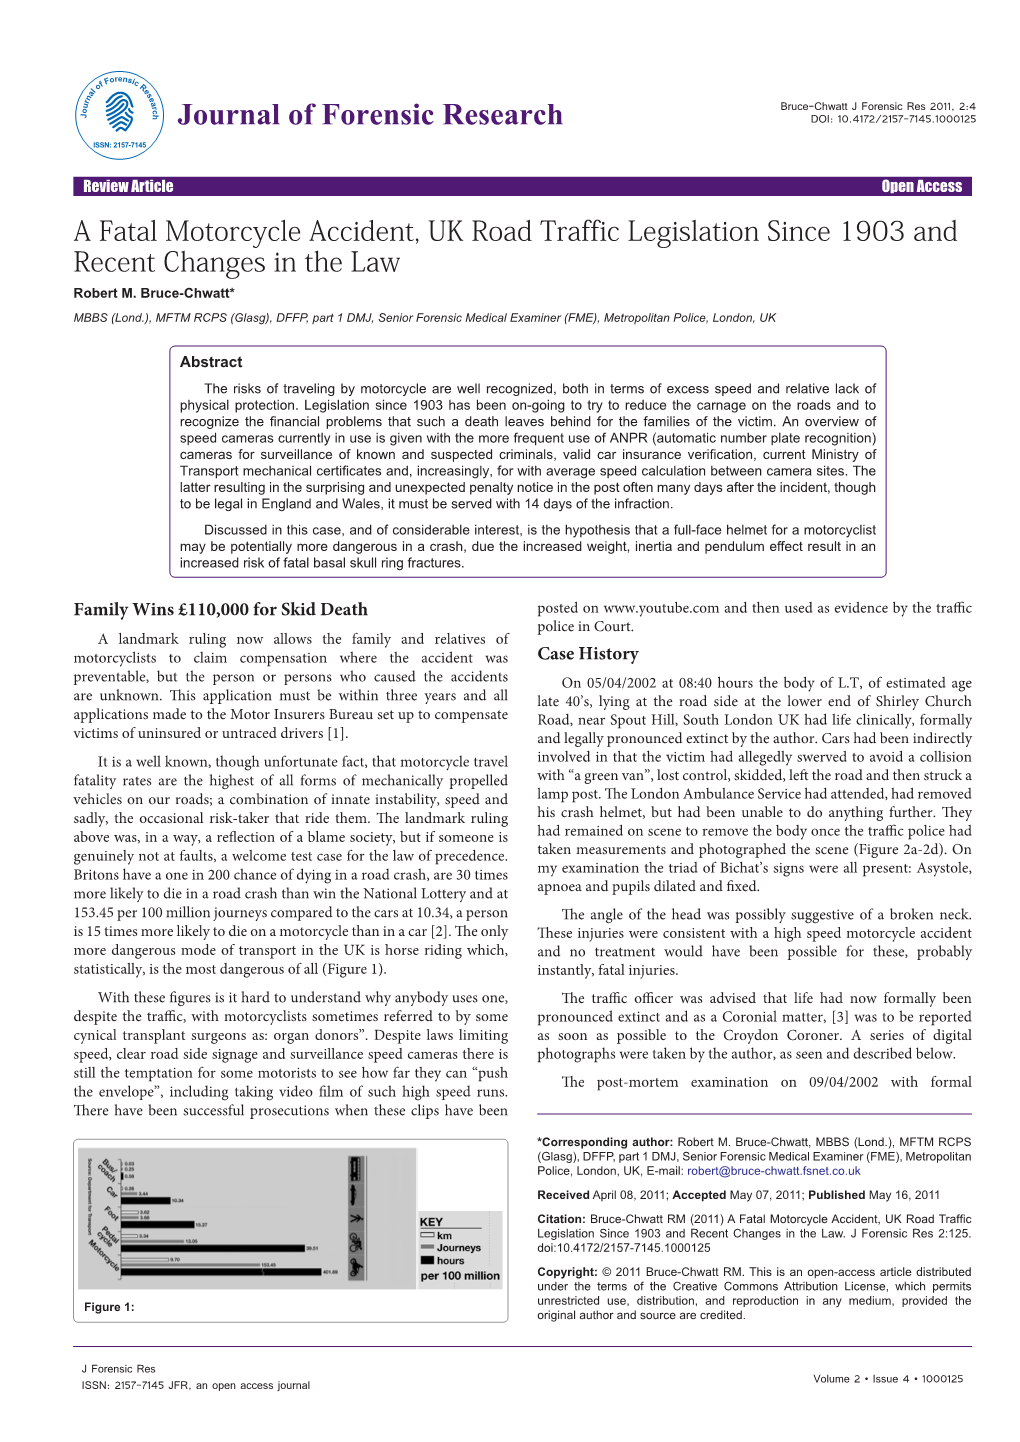 A Fatal Motorcycle Accident, UK Road Traffic Legislation Since 1903 and Recent Changes in the Law Robert M